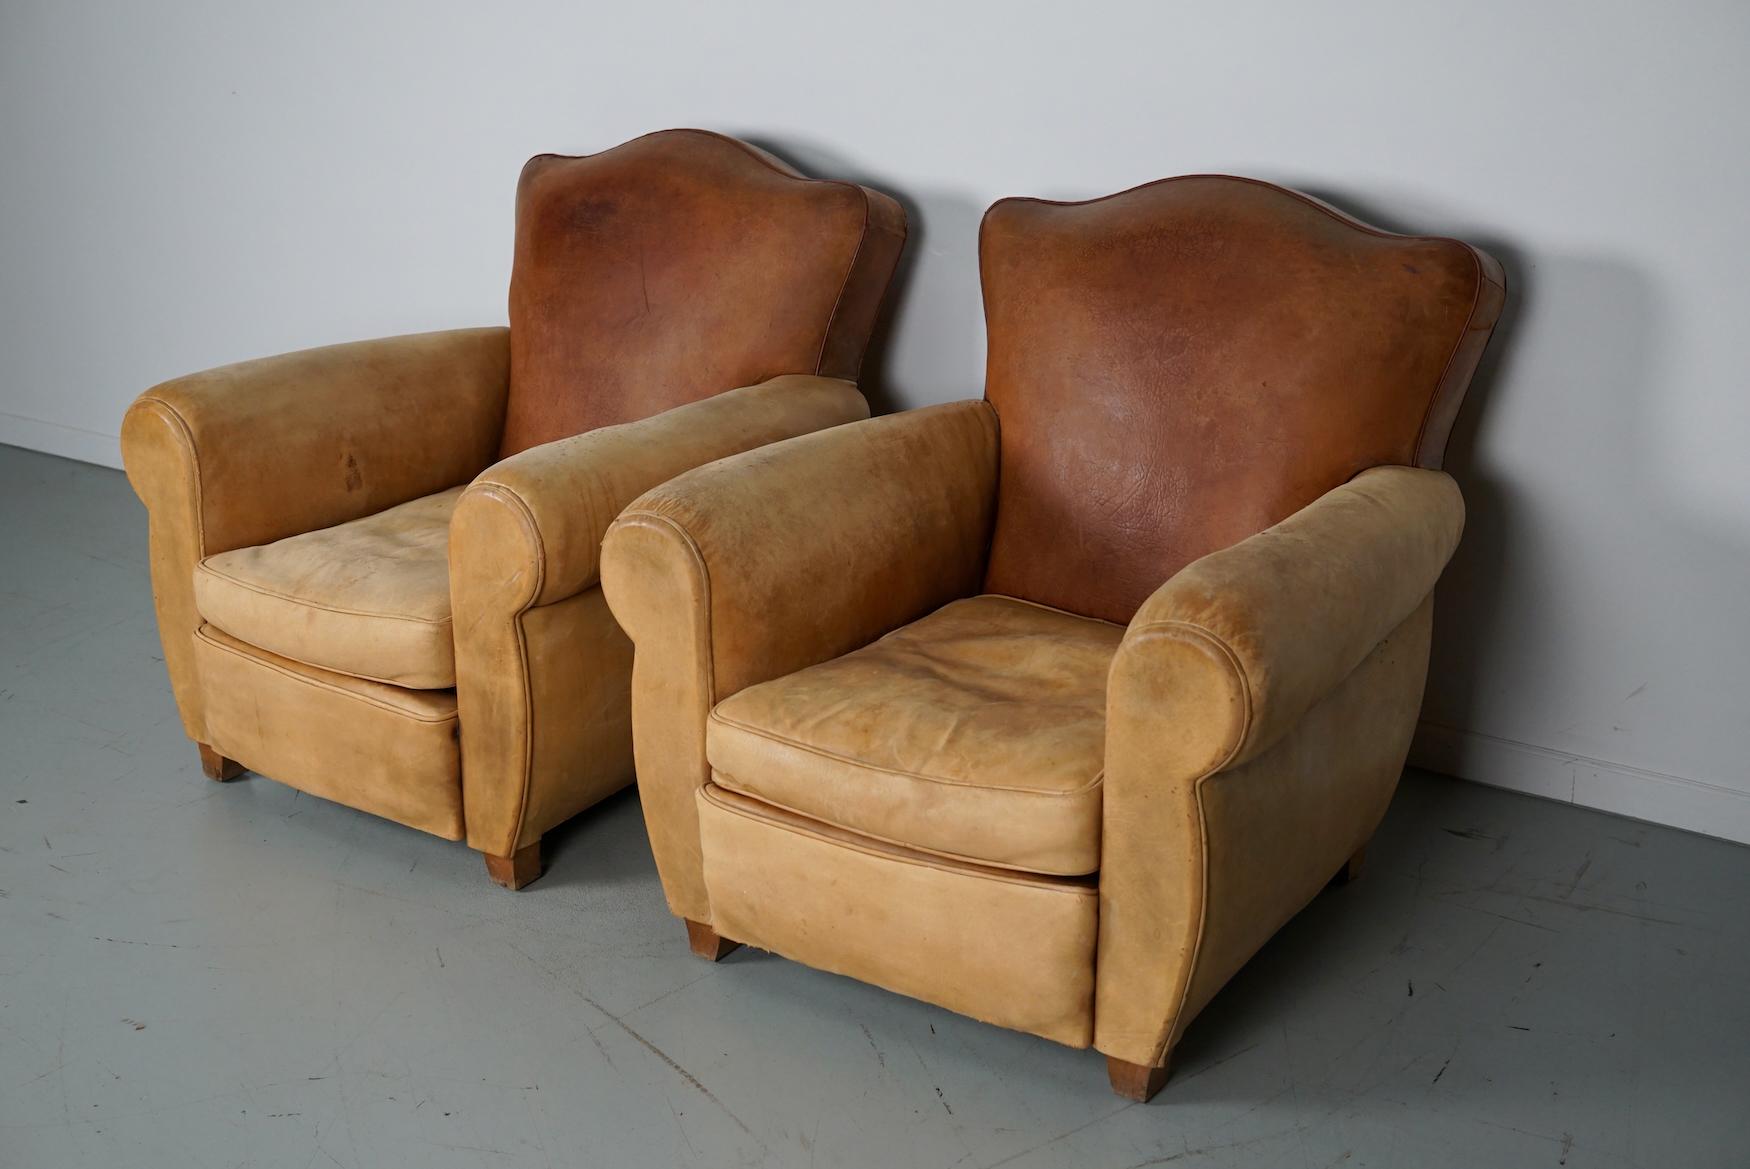 These club chairs were designed and produced in France during the 1940s. The chairs are made from cognac leather held together with metal pins and mounted on wooden legs.